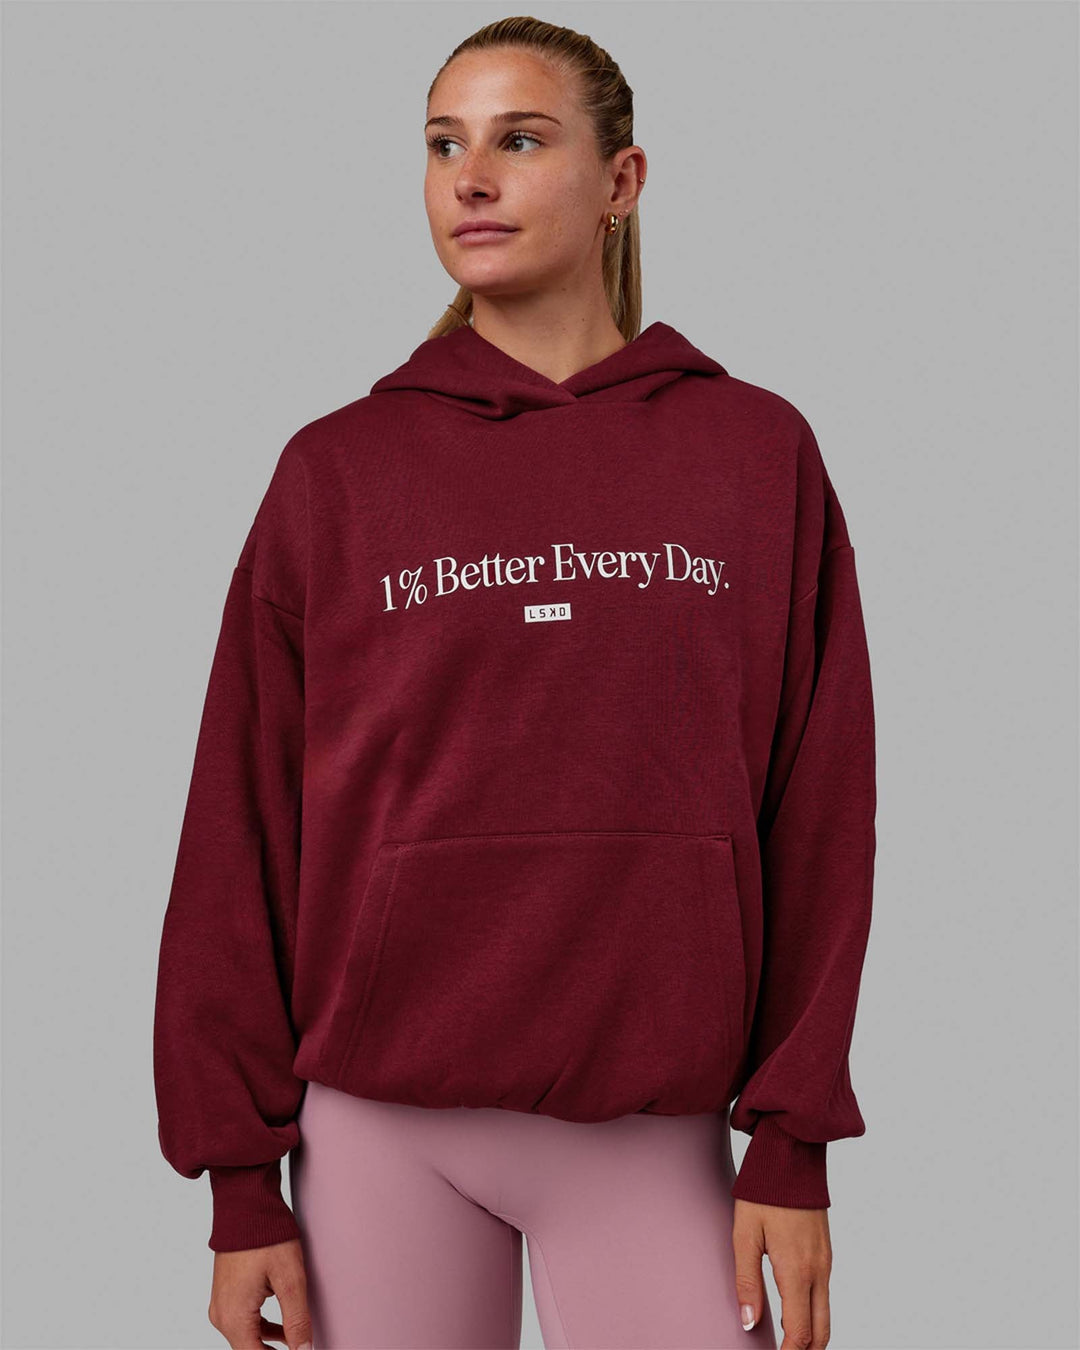 Woman wearing Unisex 1% Better Hoodie Oversize - Cranberry-White